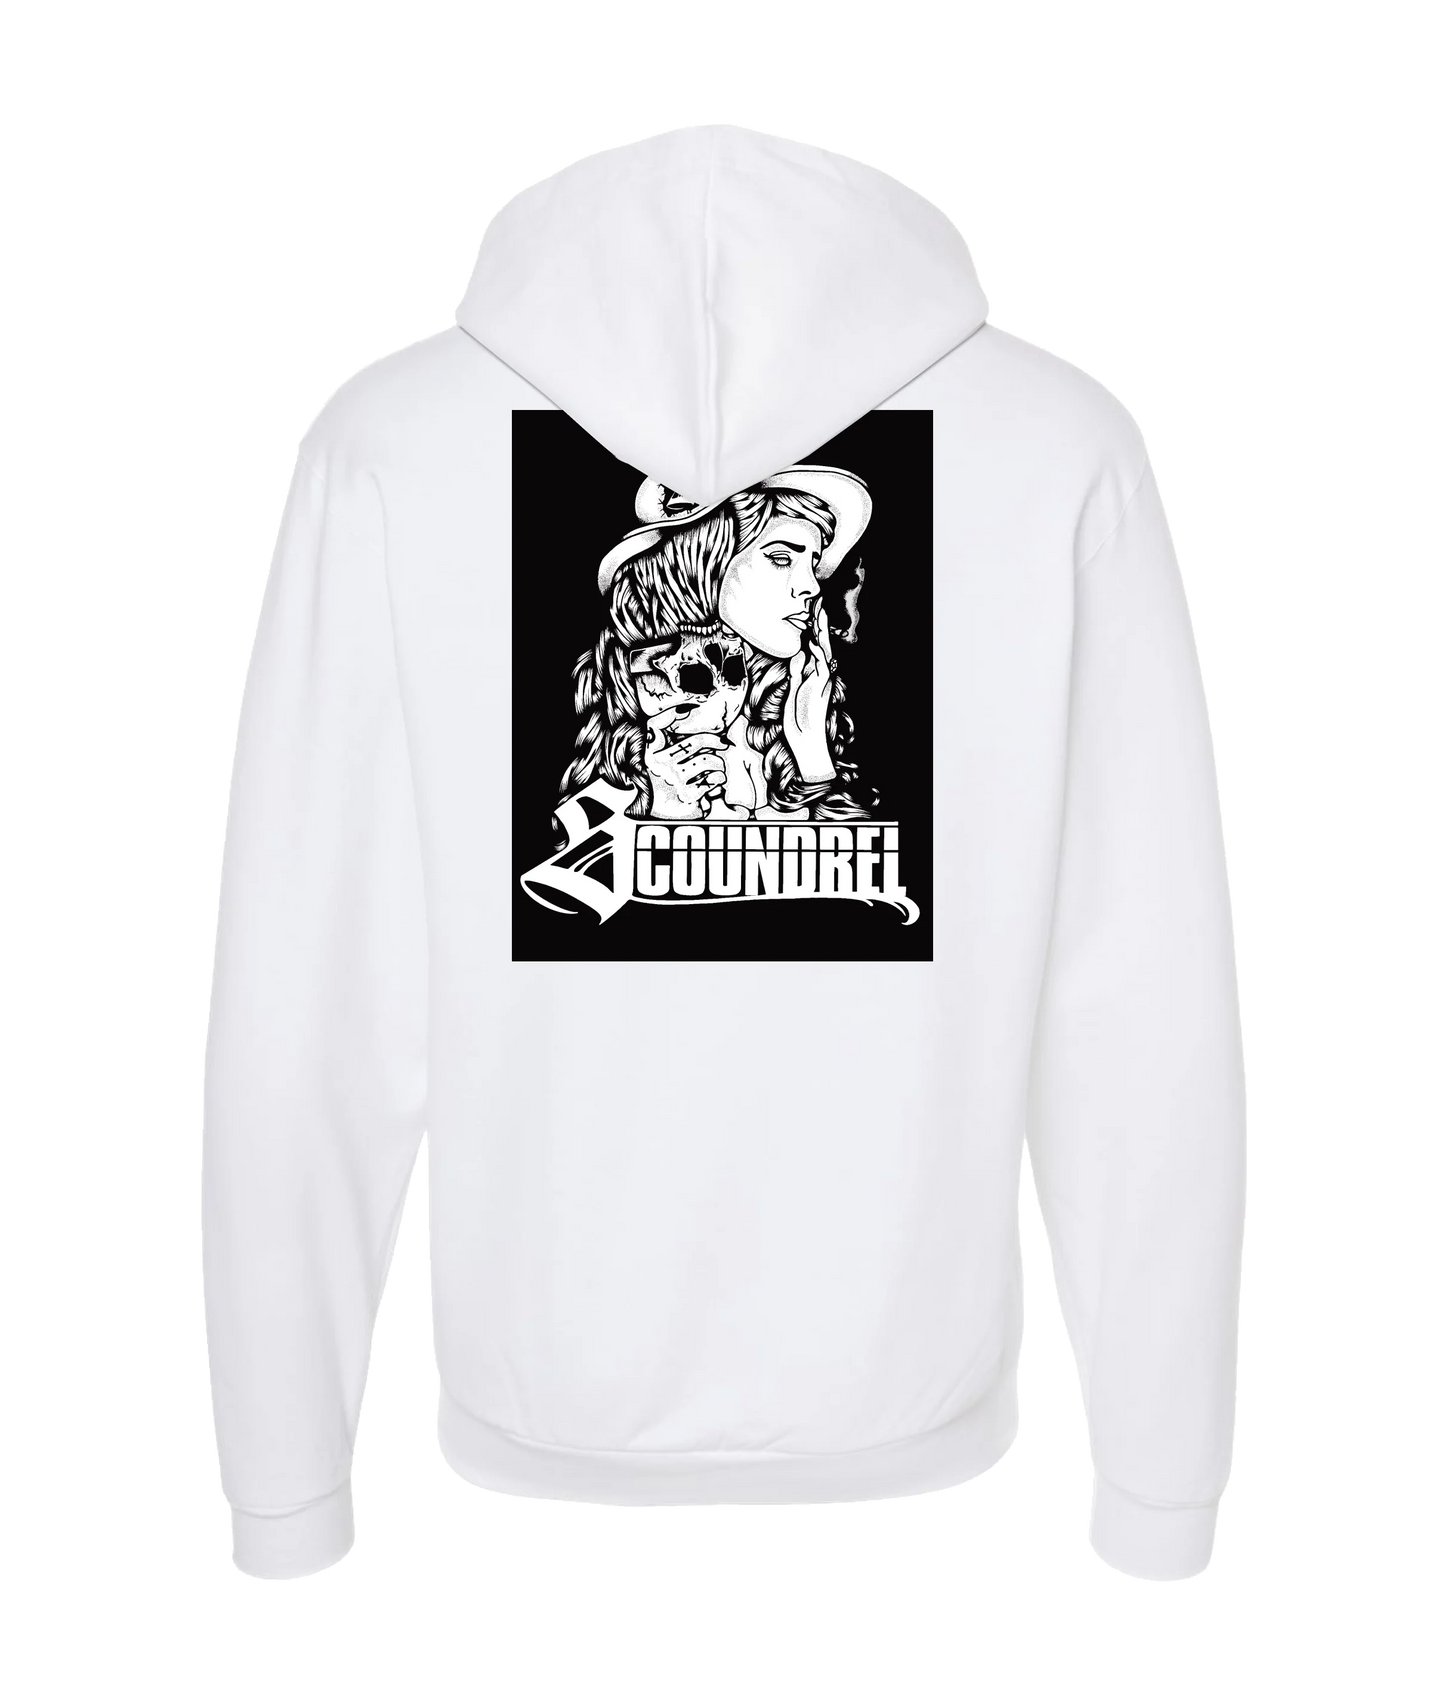 Scoundrel - Witch - White Zip Up Hoodie